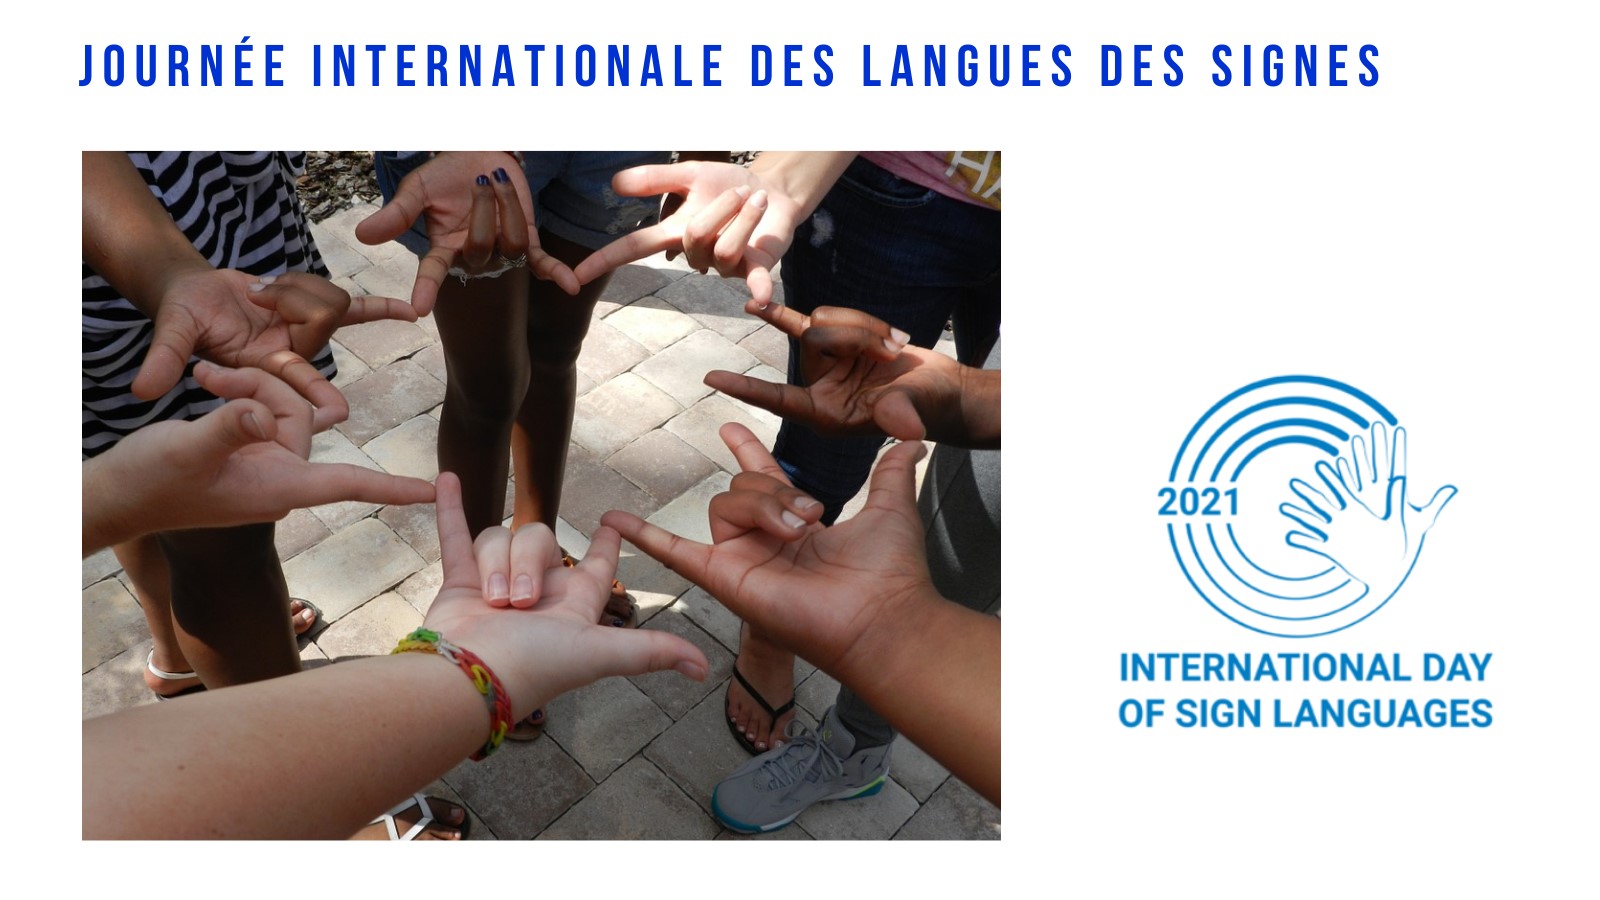 International day of sign languages